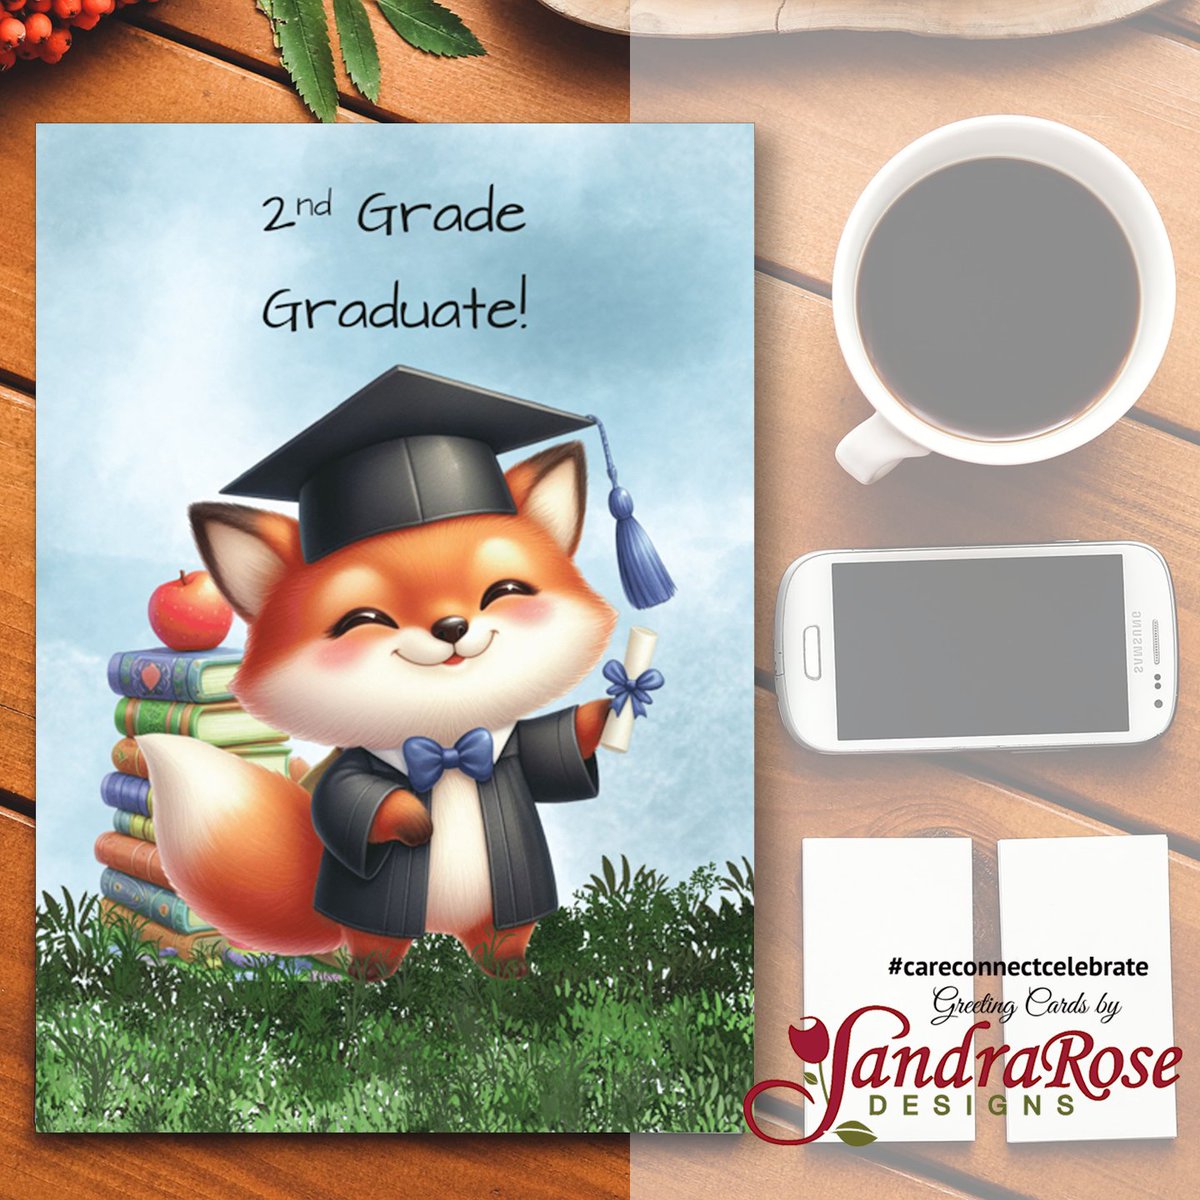 This card is a perfect way to offer congratulations and celebrate the milestone of completing second grade in a fun and spirited manner. #CareConnectCelebrate #SandraRoseDesigns @GCUniverse #Greetingcards #Greetingcard #graduate #congratulations greetingcarduniverse.com/occasions/cong…